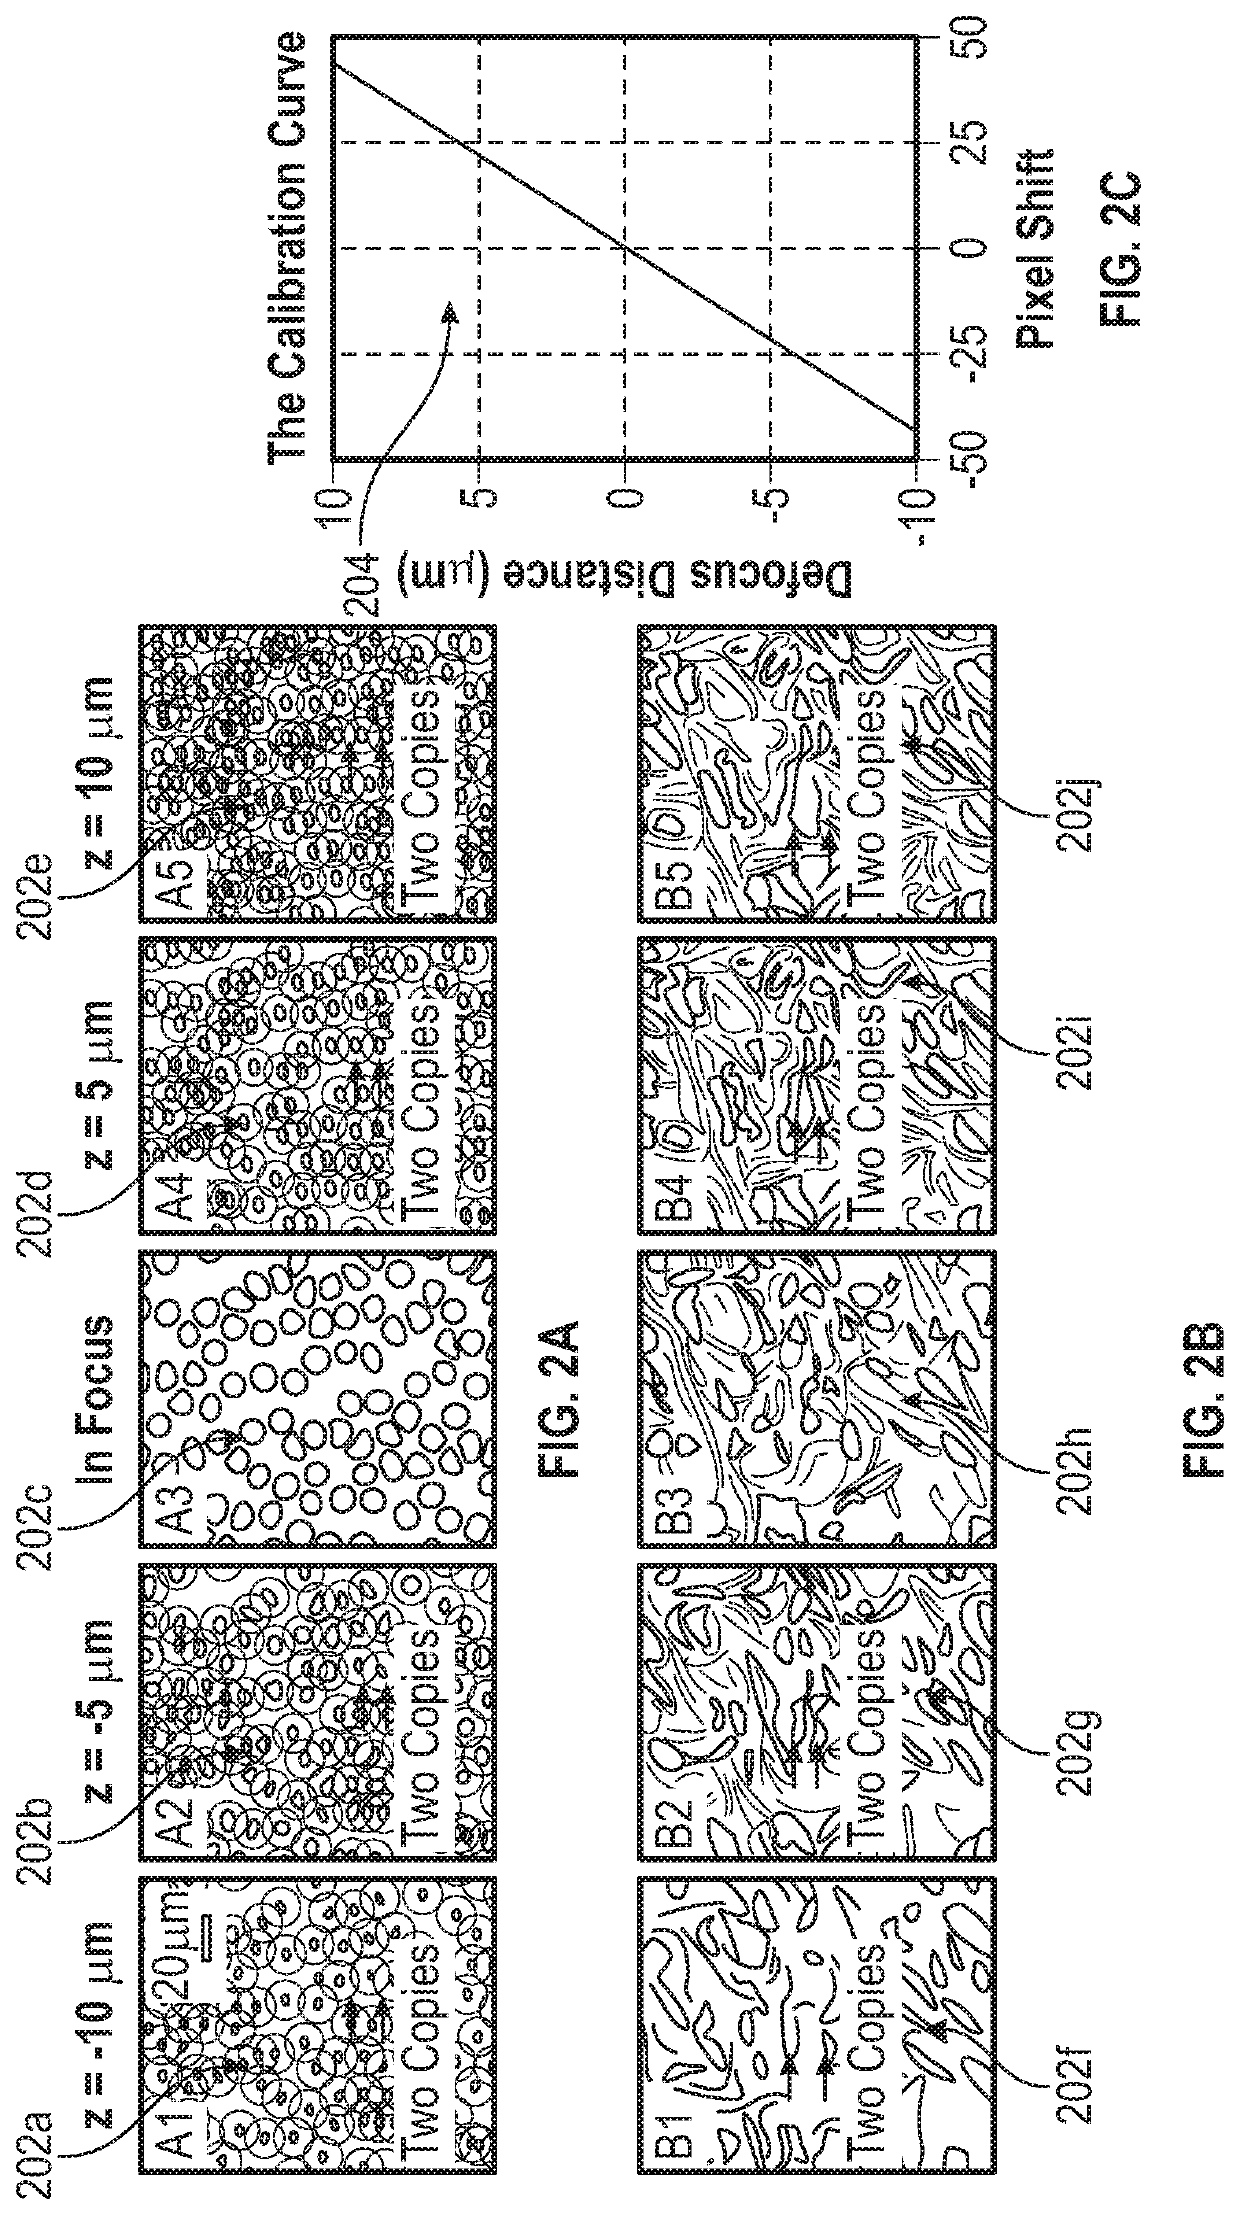 Methods and Systems for Single Frame Autofocusing Based on Color-Multiplexed Illumination